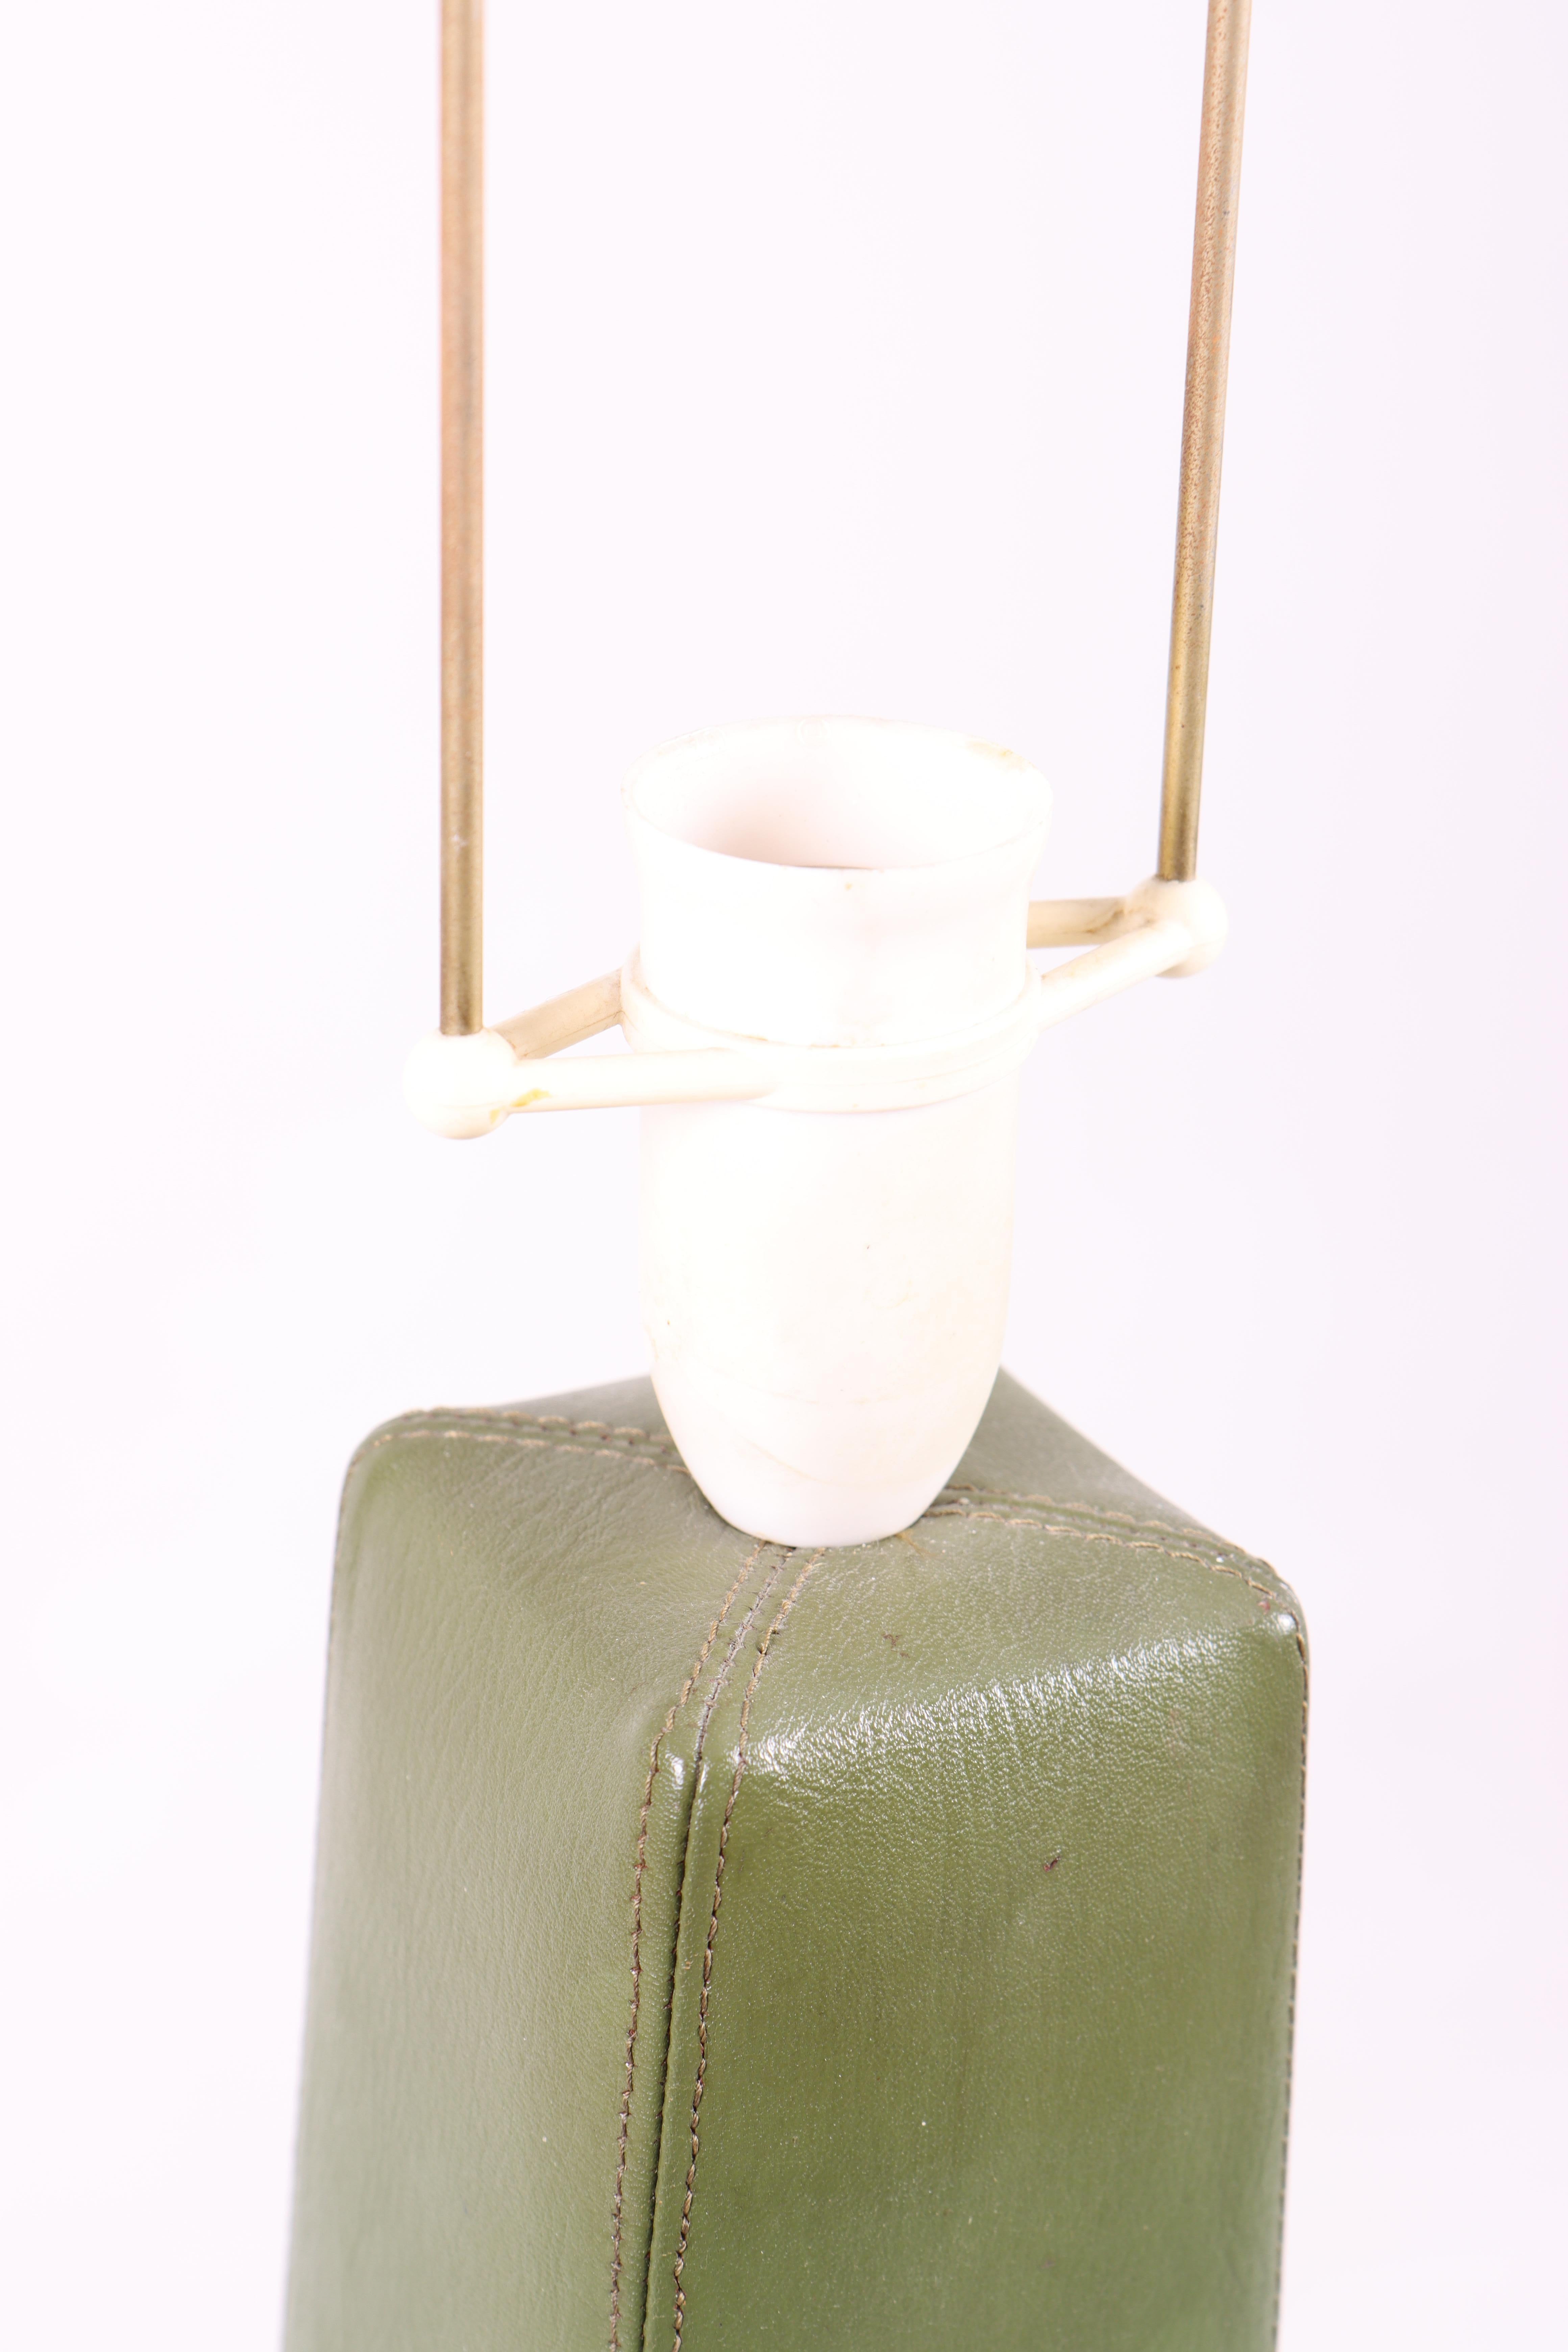 Scandinavian Modern Midcentury Table Lamp in Patinated Leather, Made in Sweden For Sale